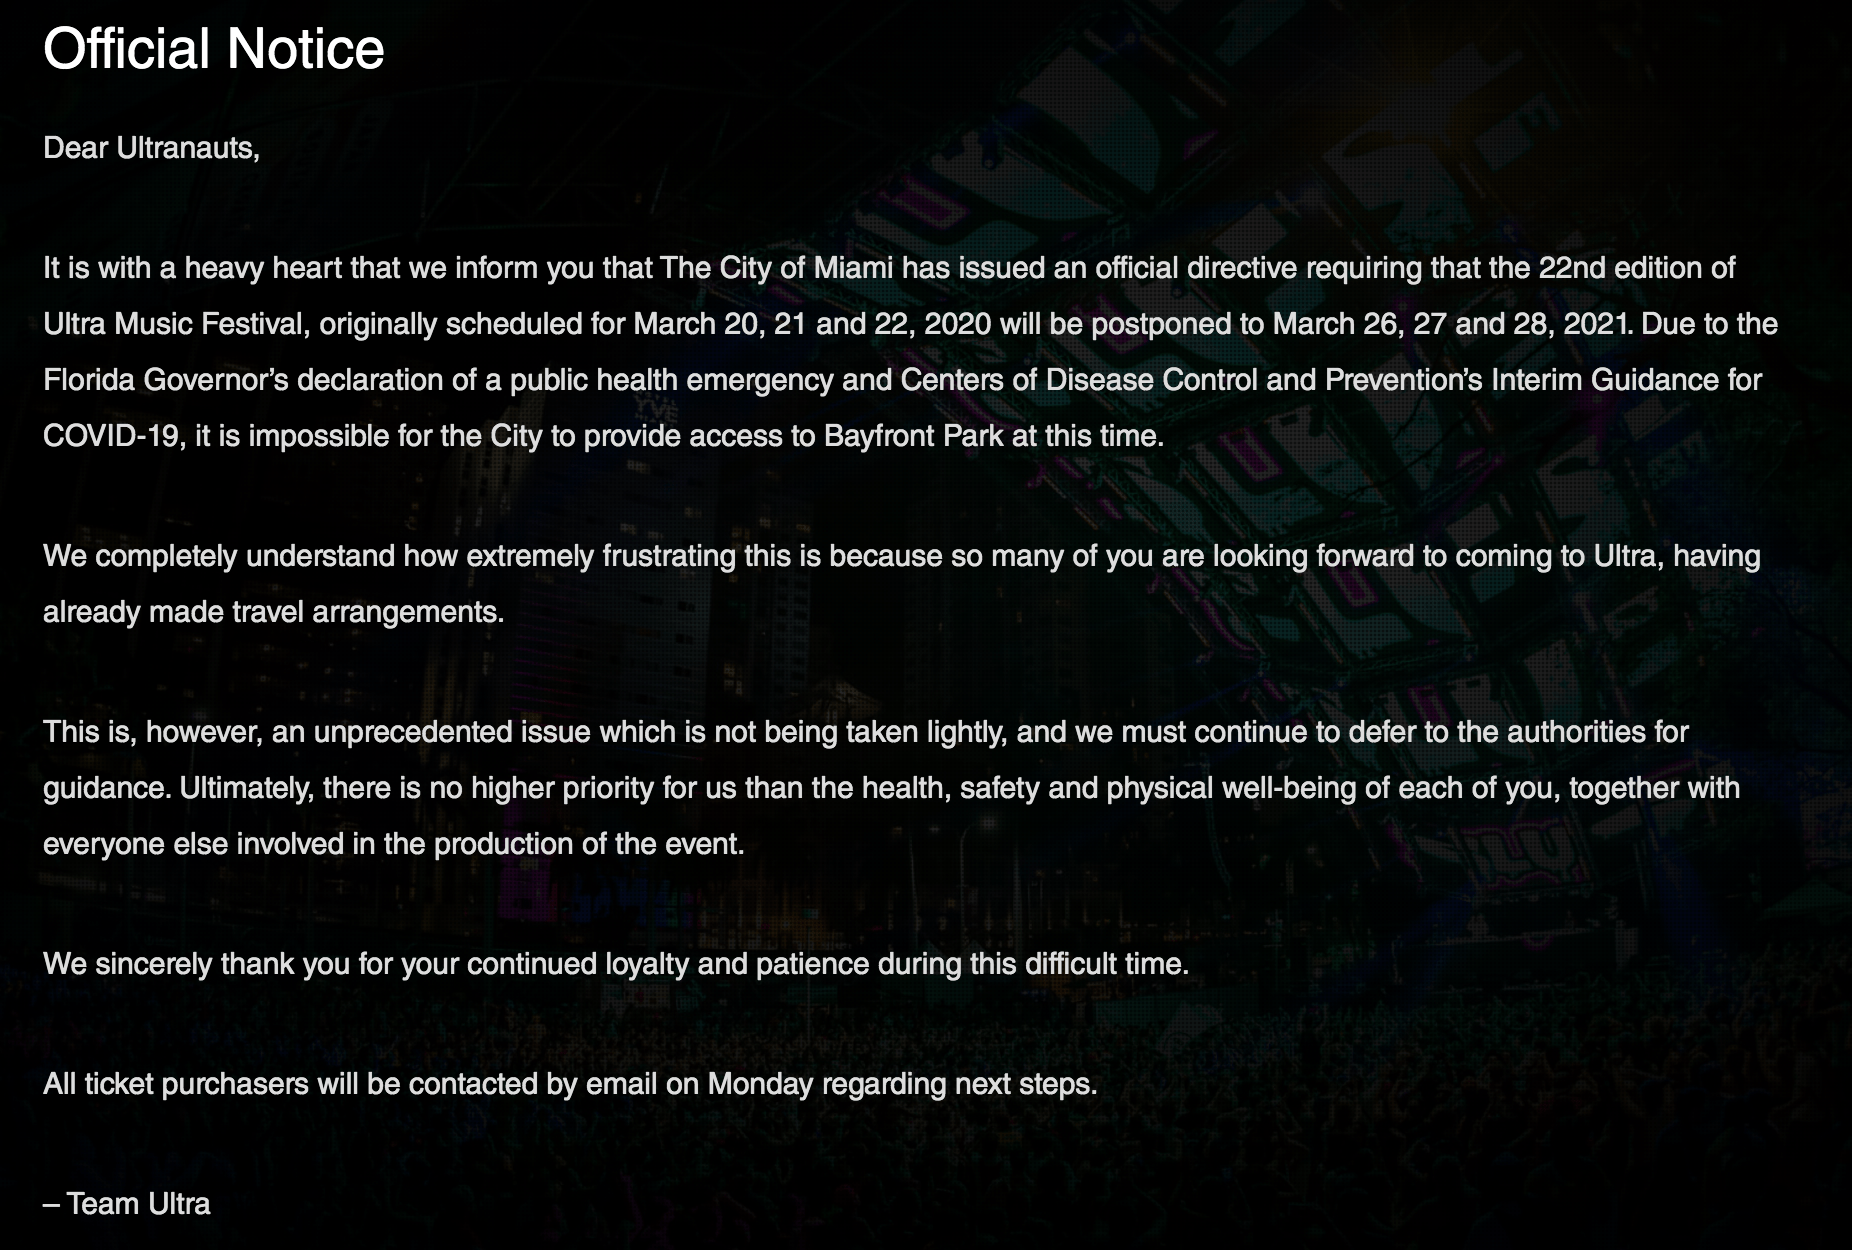 UMF Official Statement